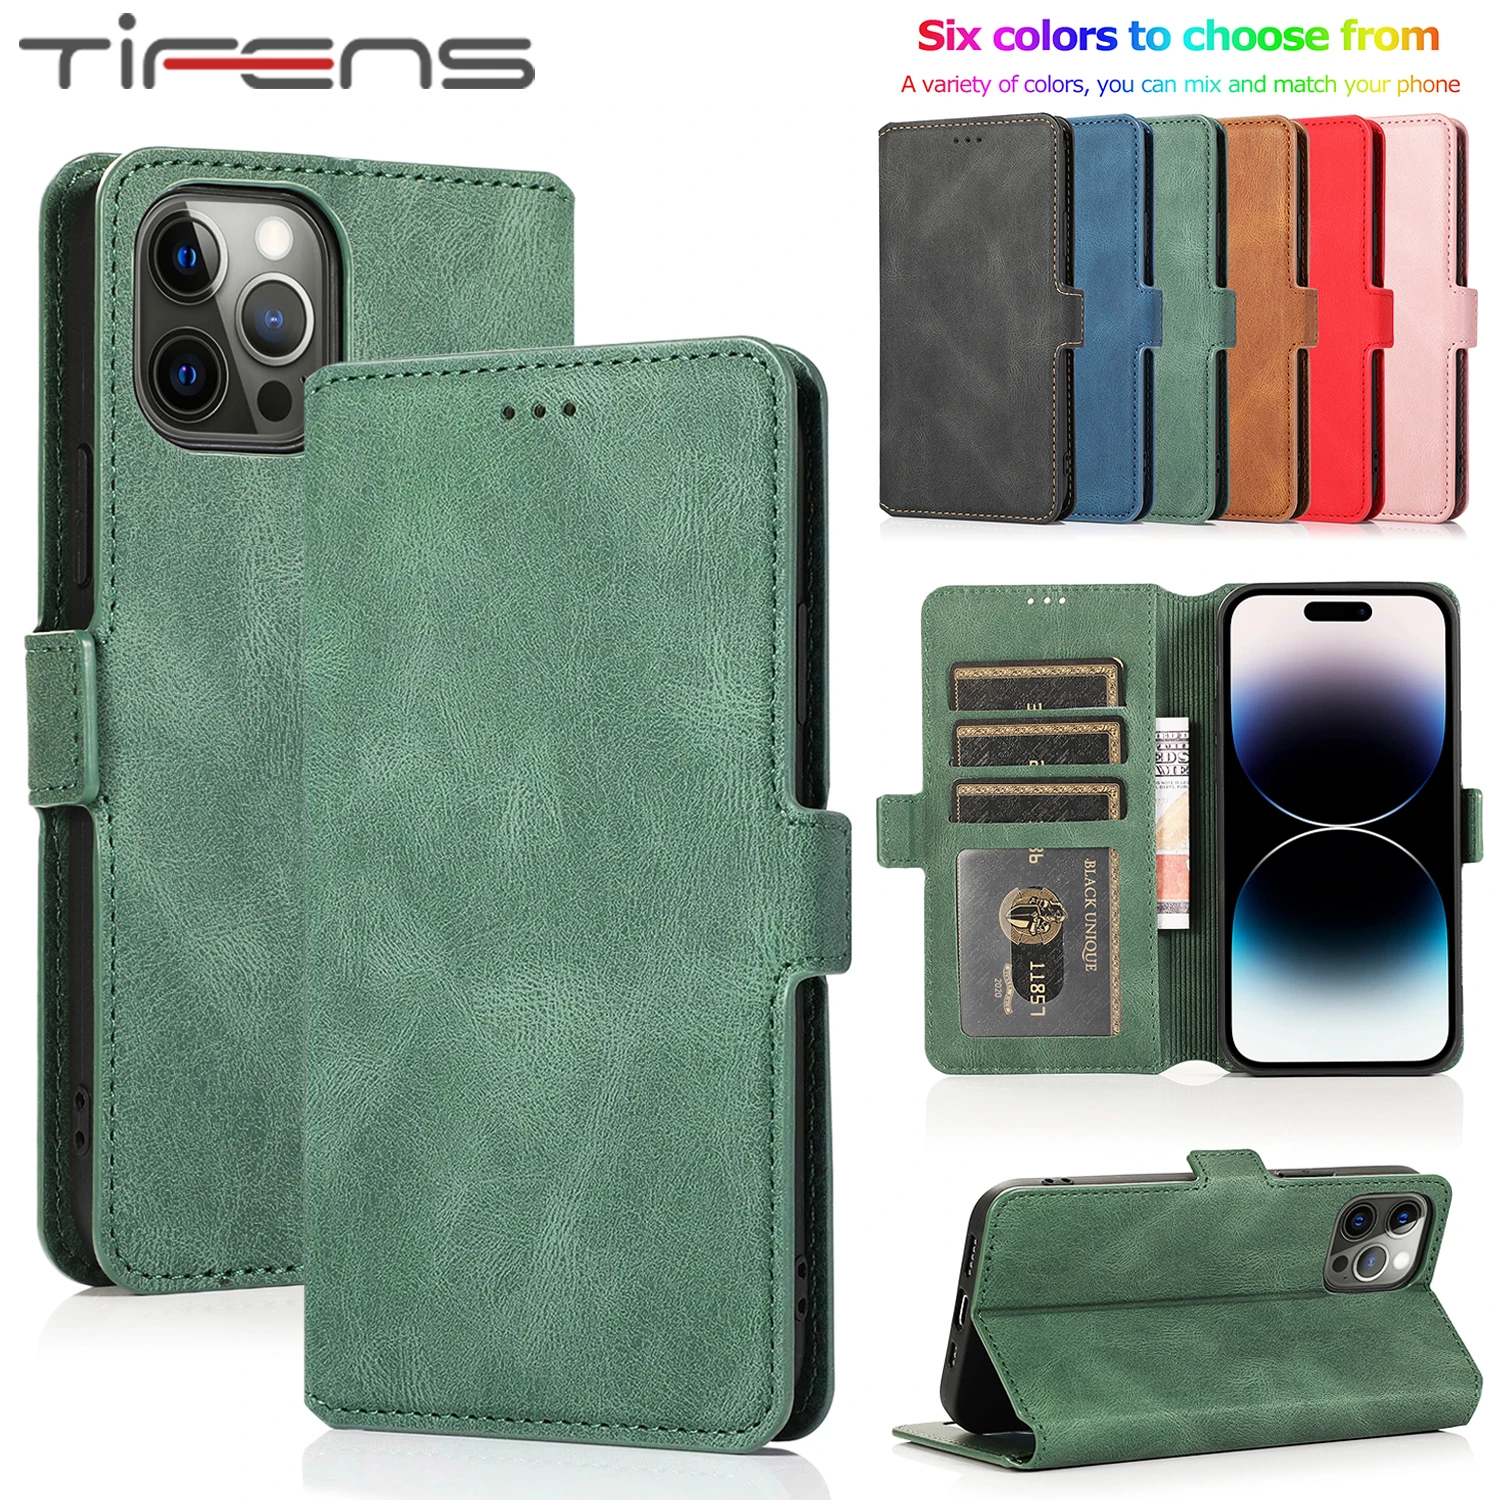 Leather Flip Wallet Case For iPhone 12 13 Mini 11 Pro XS MAX X XR 8 7 6s 6 Plus 5 5s SE 2020 Card Stand Slot Phone Cover Coque